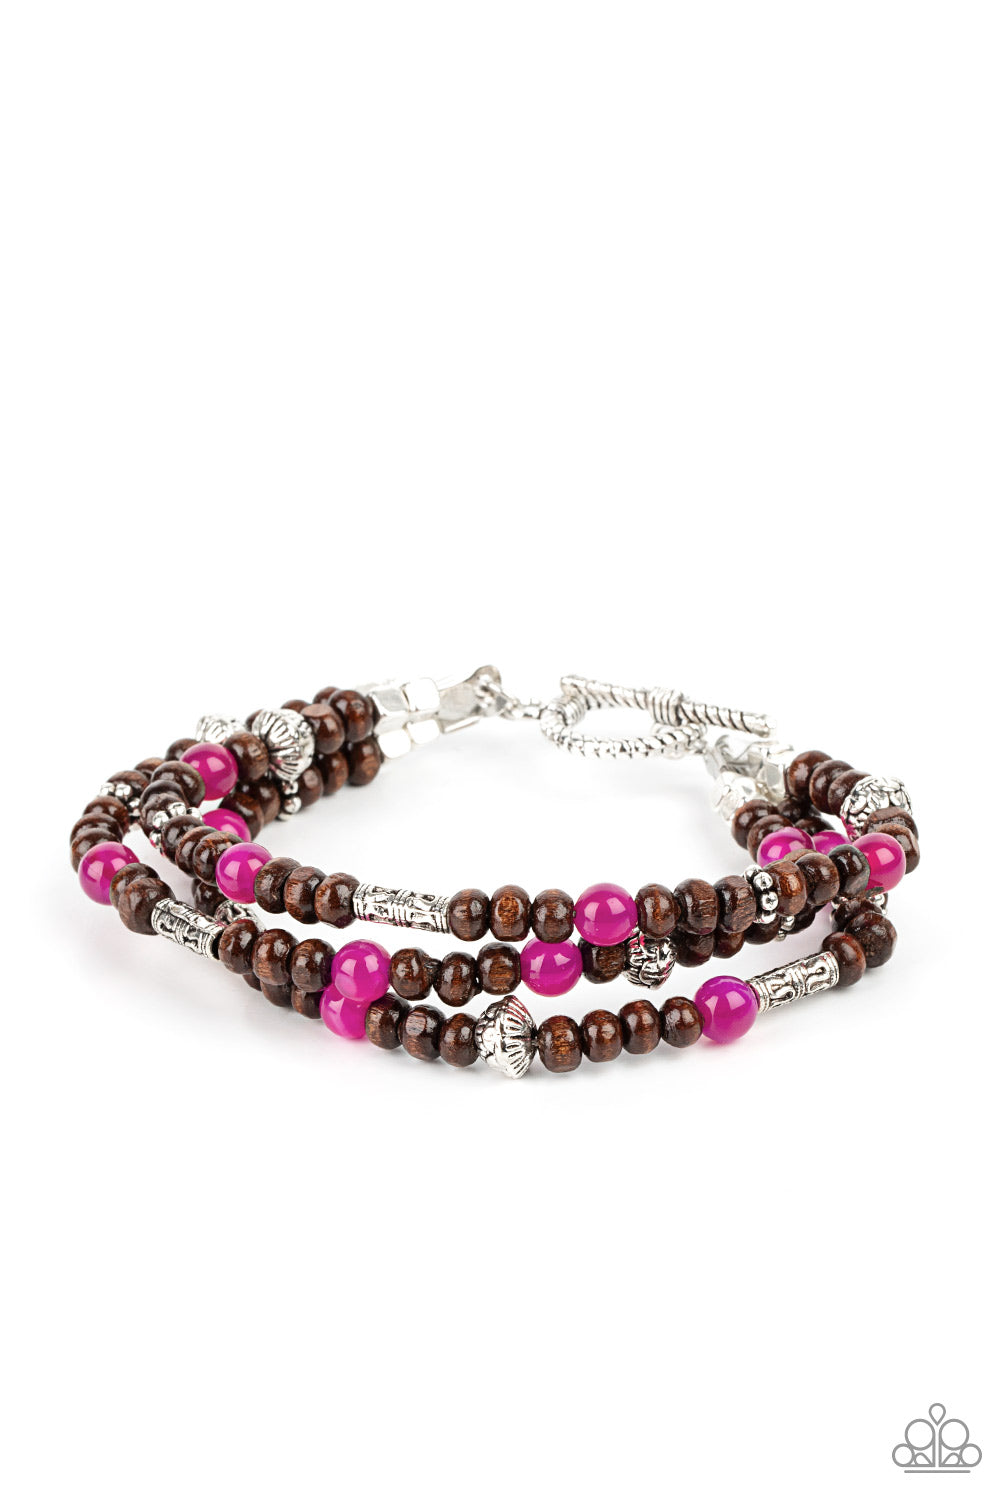 Woodsy Walkabout Pink Bracelet - Paparazzi Accessories  Pink stones and ornate silver beads provide a refreshing accent to triple strands of wooden beads as they layer around the wrist in an air of earthy sophistication. Features a toggle clasp closure.  All Paparazzi Accessories are lead free and nickel free!  Sold as one individual bracelet.